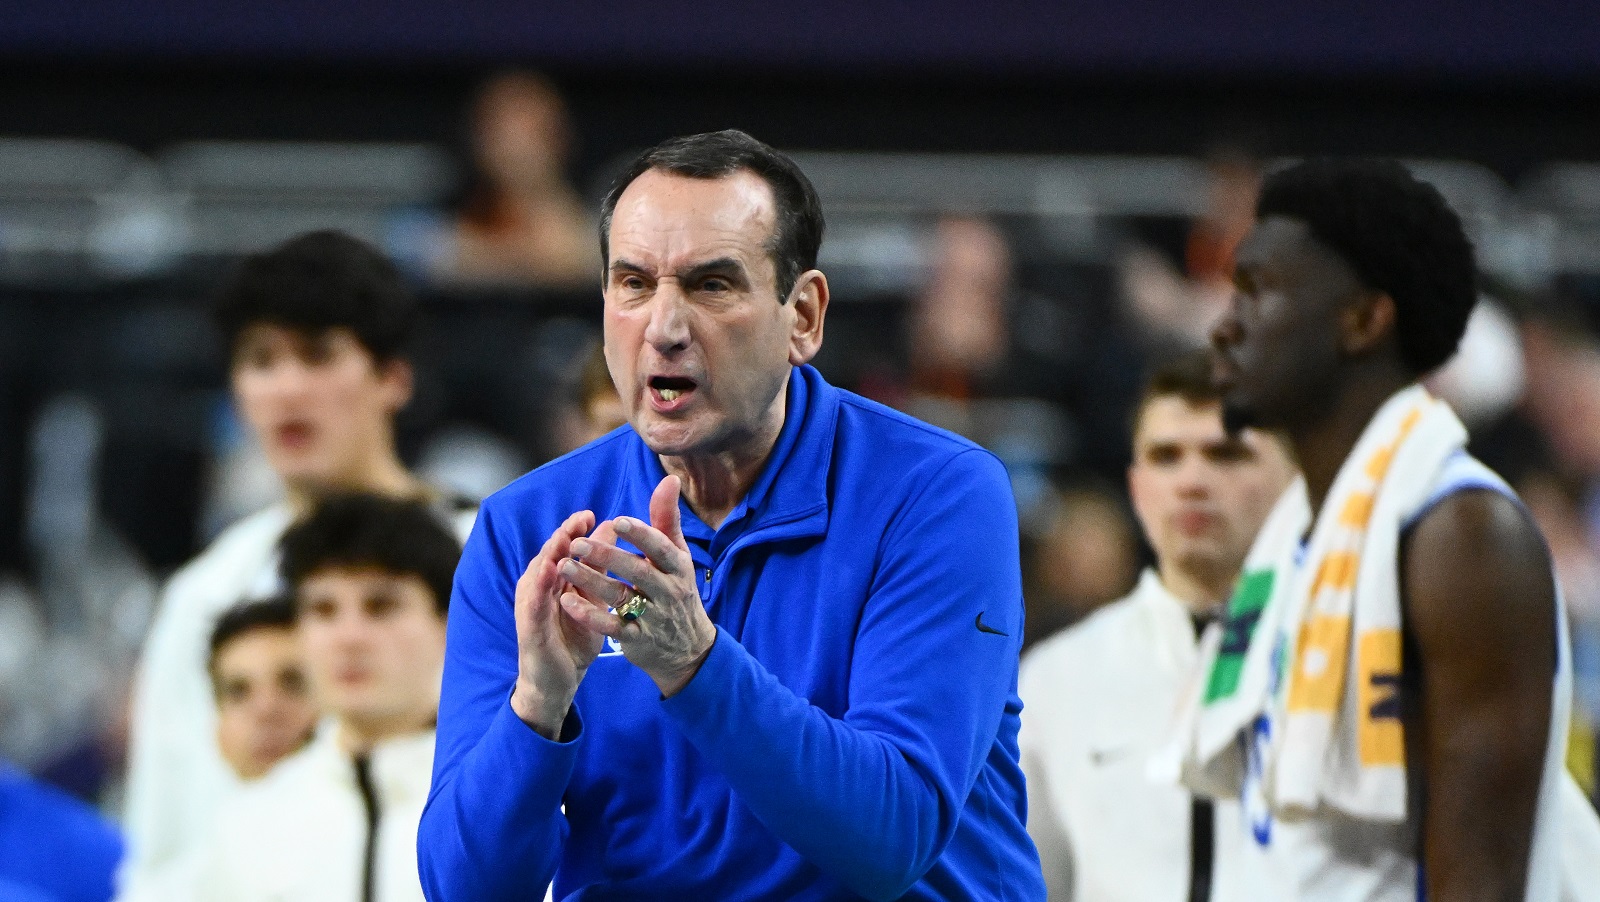 Mike Krzyzewski of the Duke Blue Devils cheers on his team as they take on the North Carolina Tar Heels in the semifinal game of the 2022 NCAA Men's Basketball Tournament Final Four on April 2, 2022, in New Orleans.